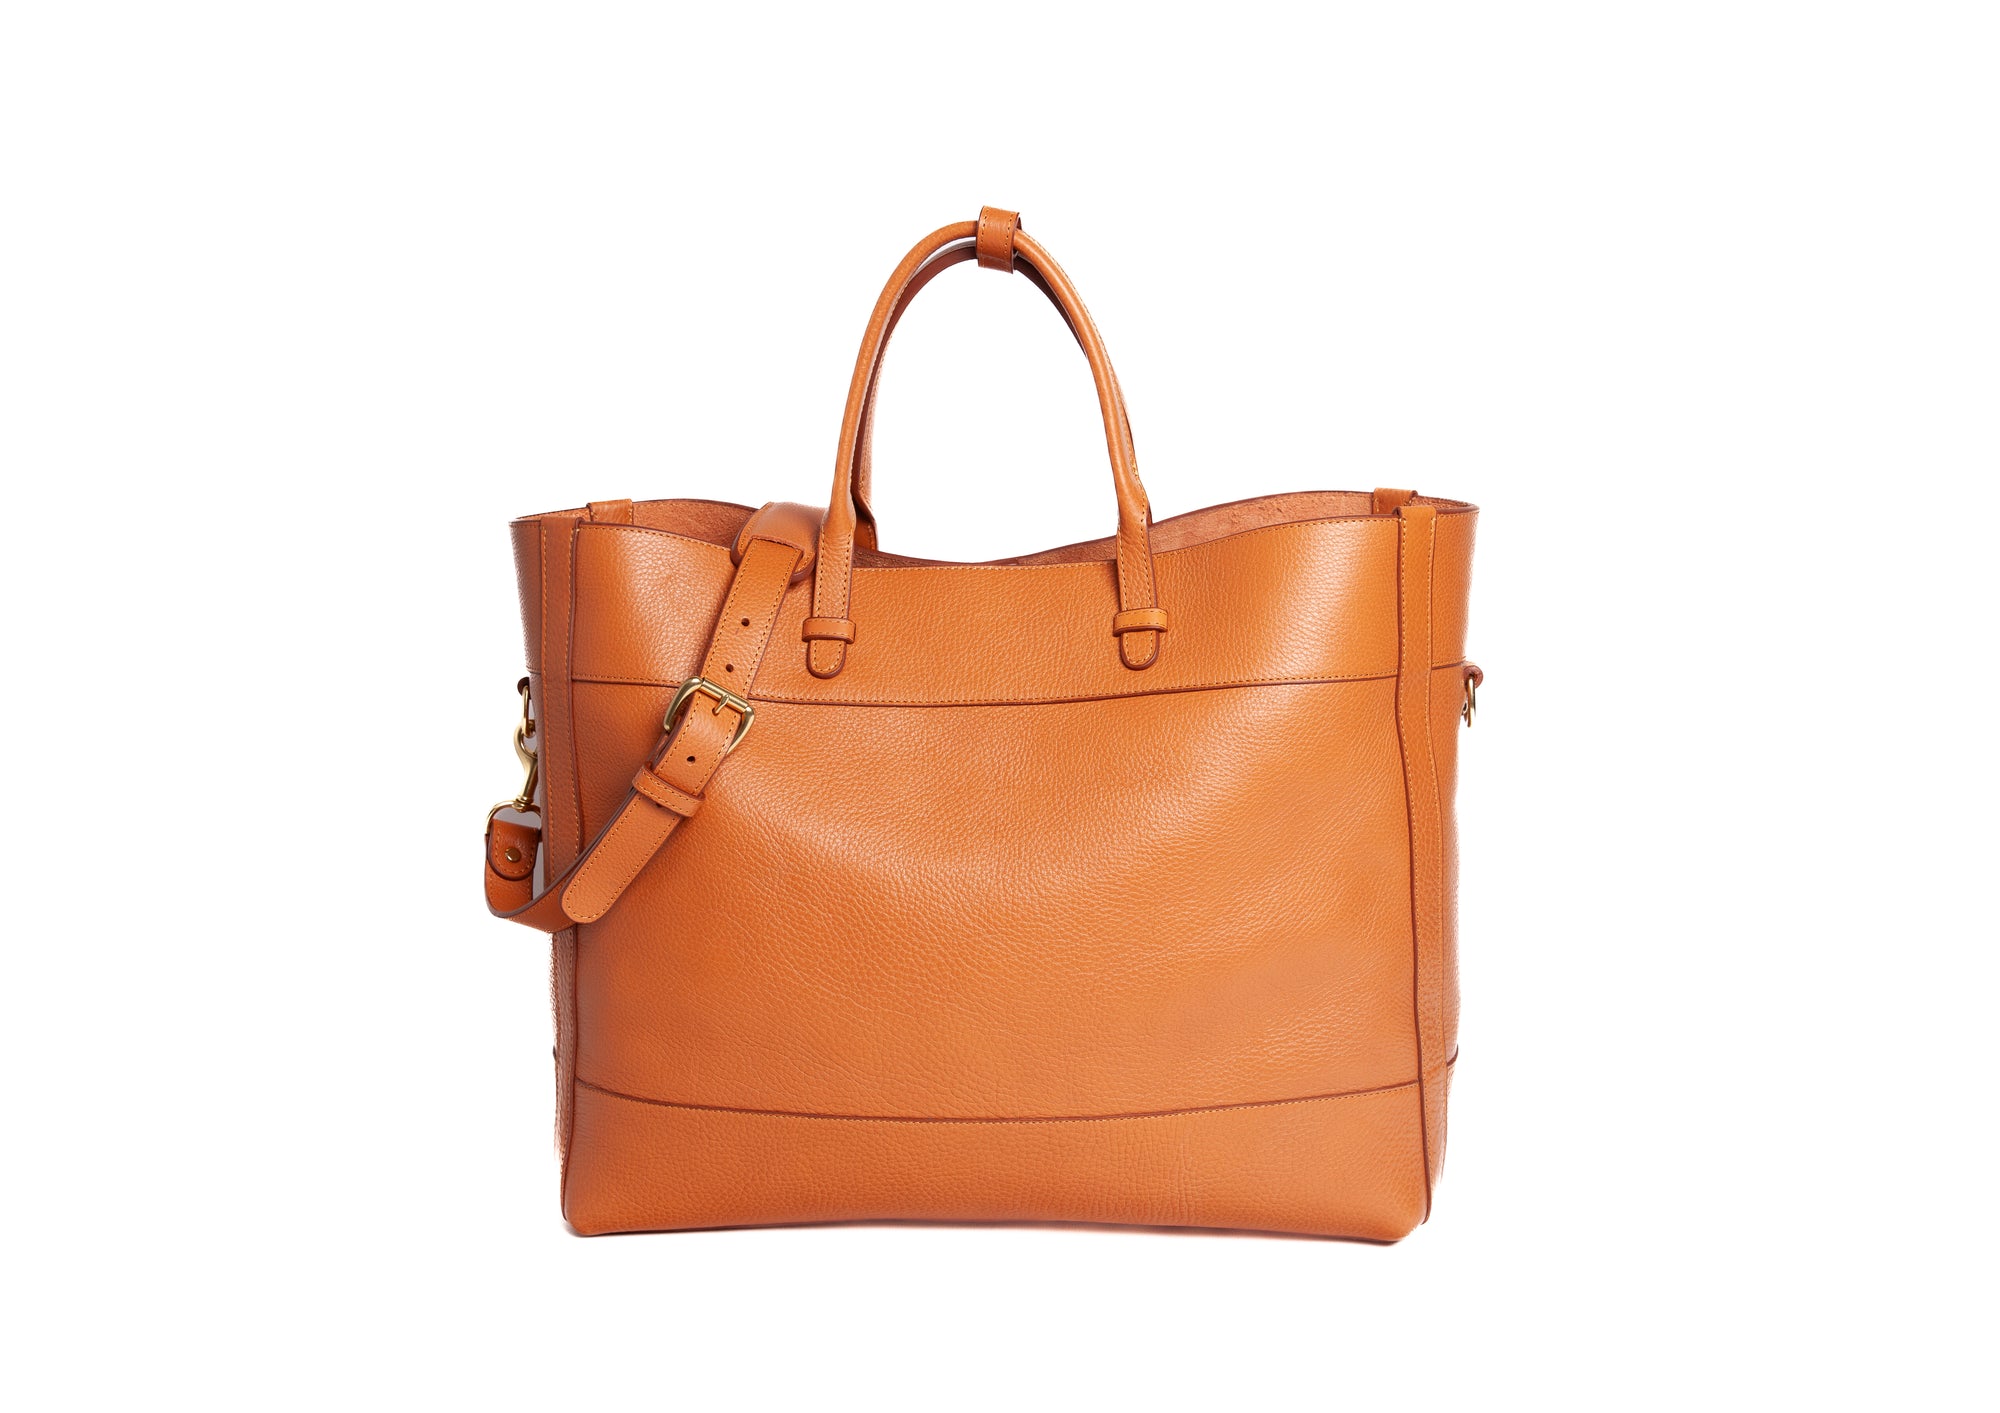 The 929 Tote Camel